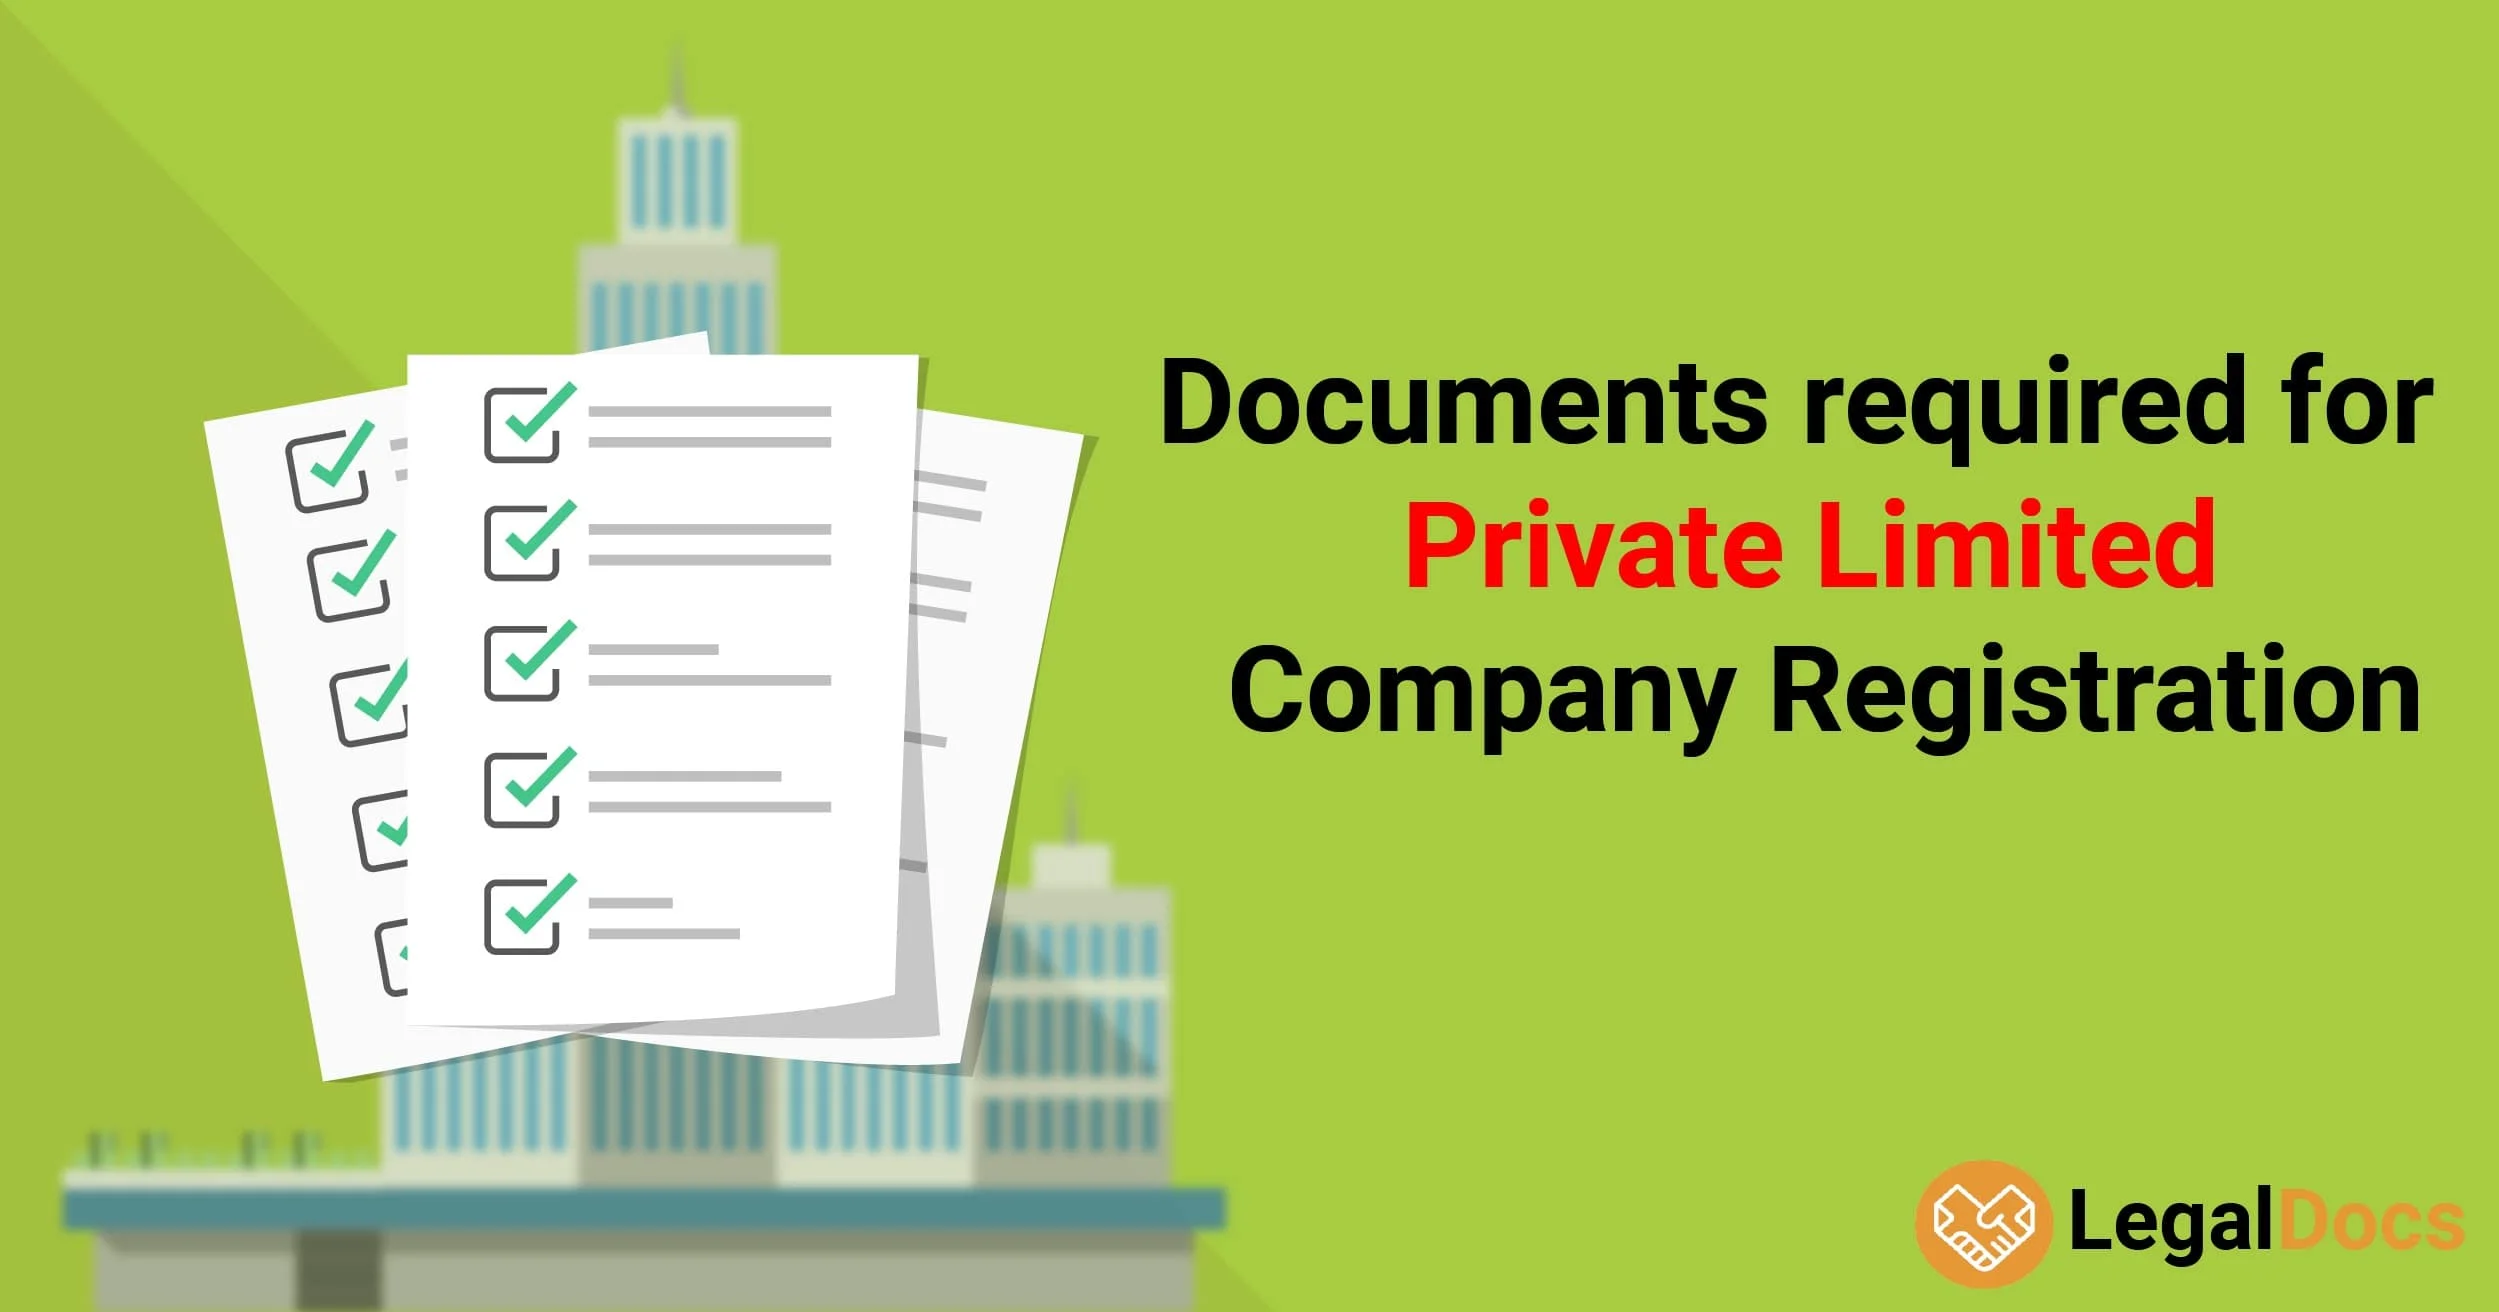 Documents required for Private Limited Company Registration - LegalDocs